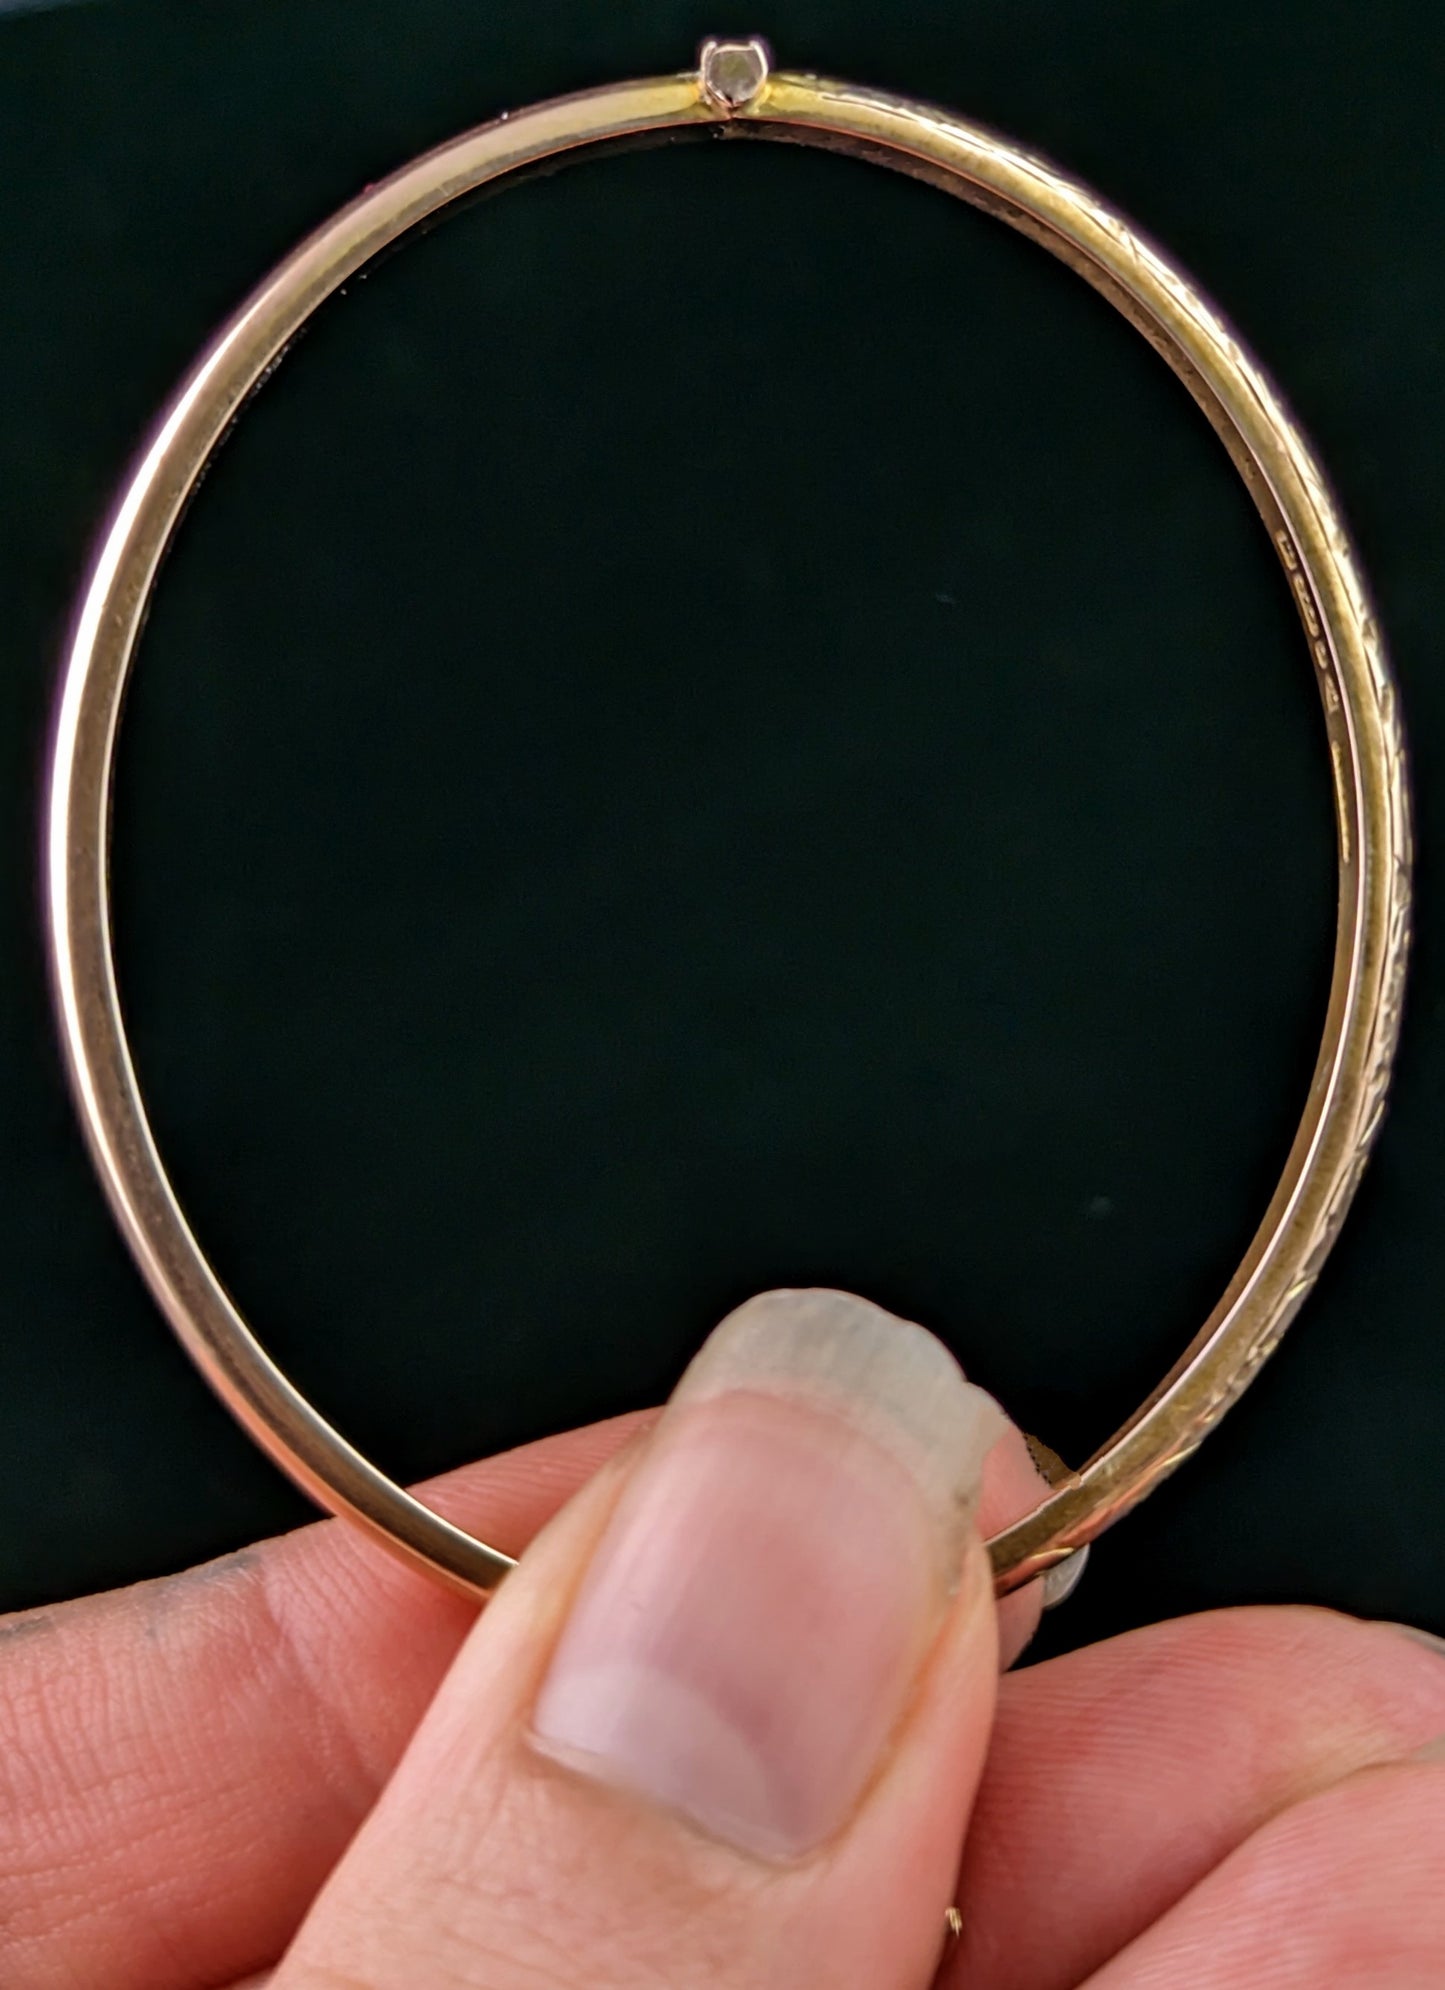 Antique 9ct gold dainty bangle, engraved, Art Deco